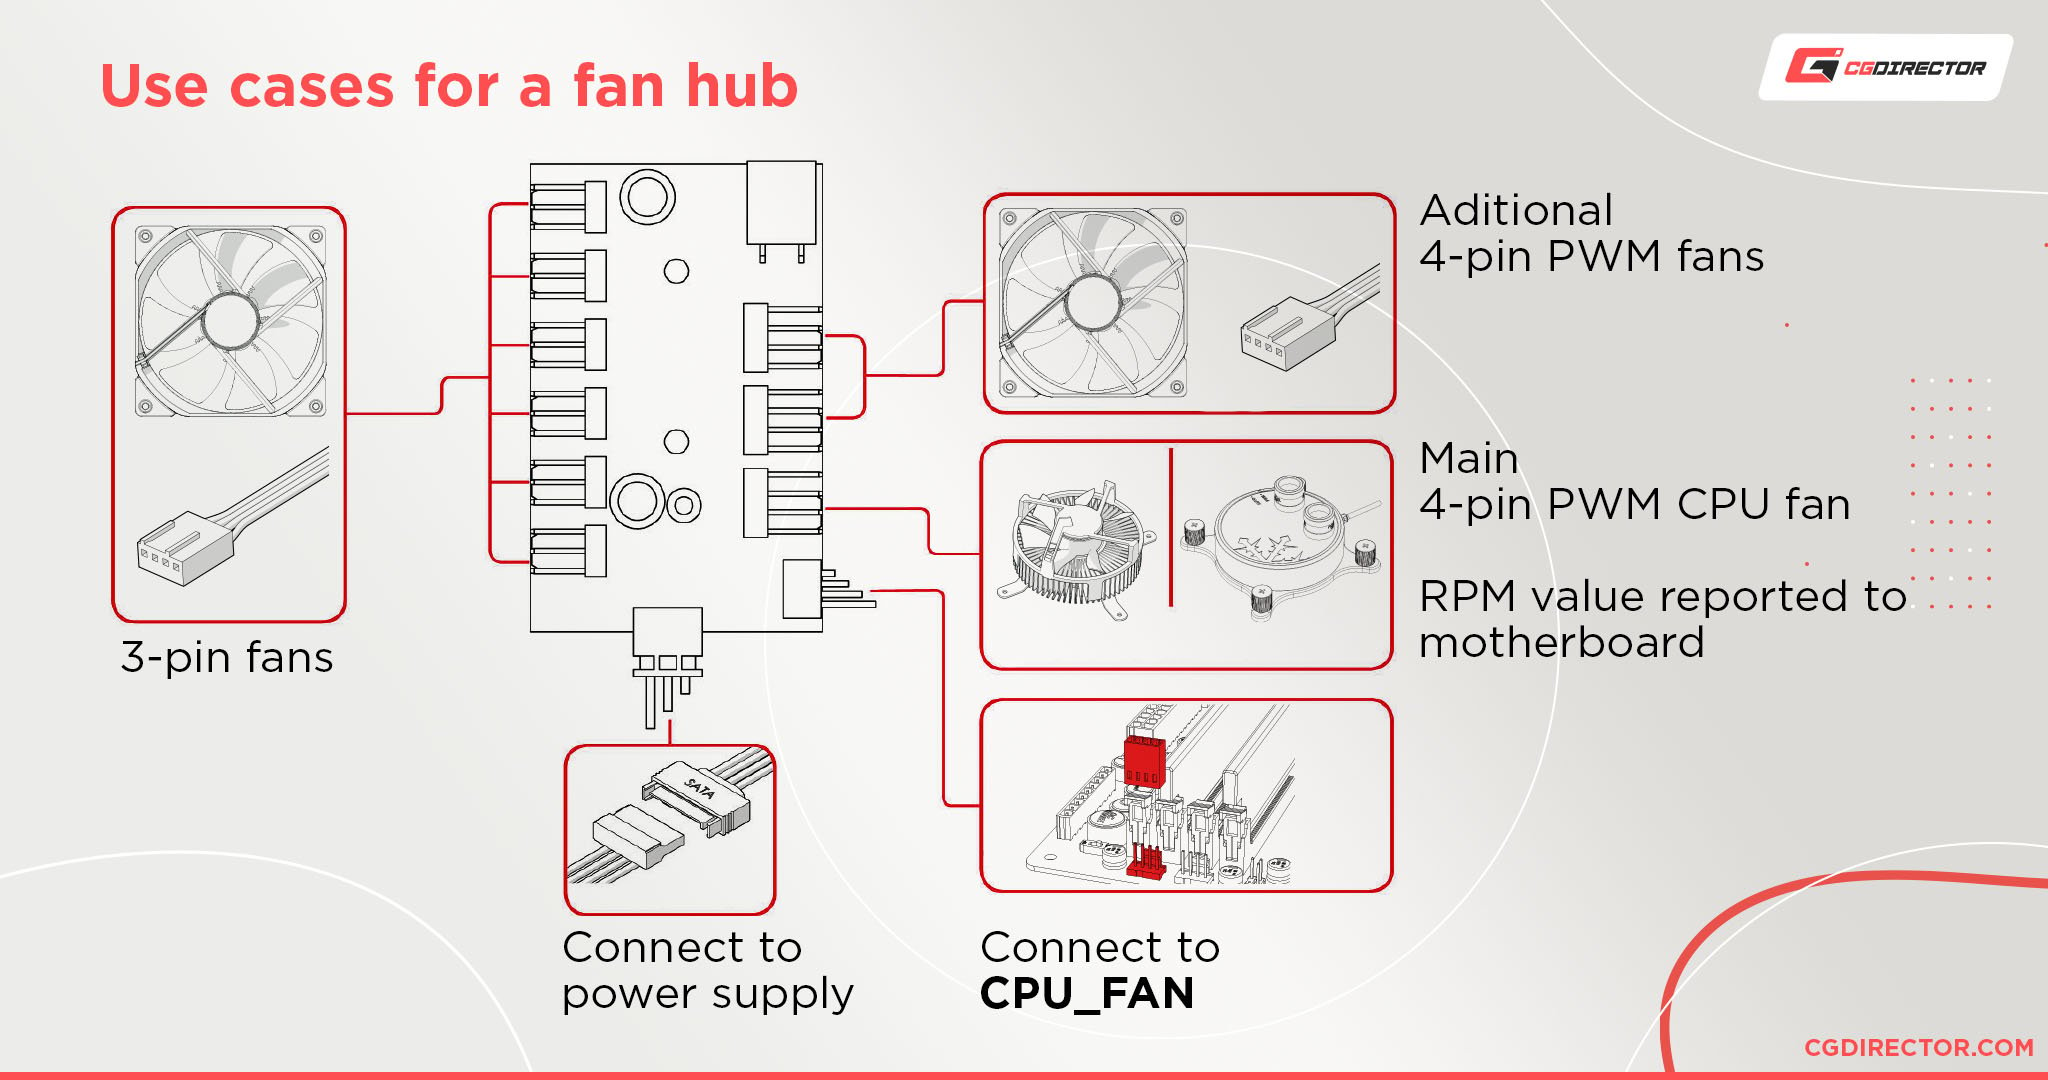 Use cases for a fan hub